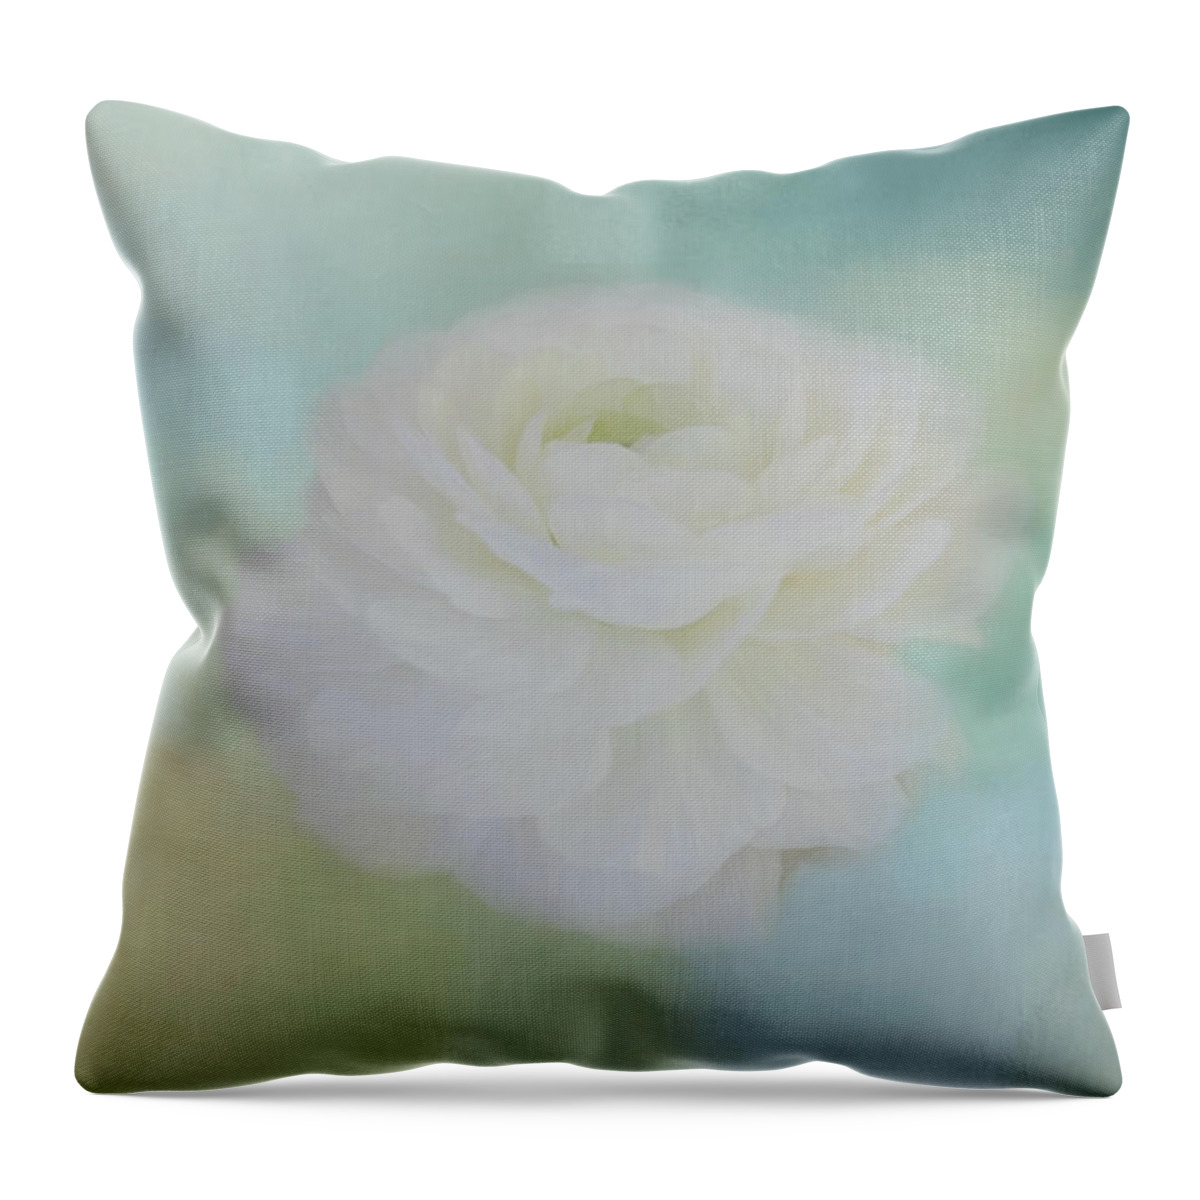 Rose Throw Pillow featuring the photograph Poetry Dreams by Kim Hojnacki